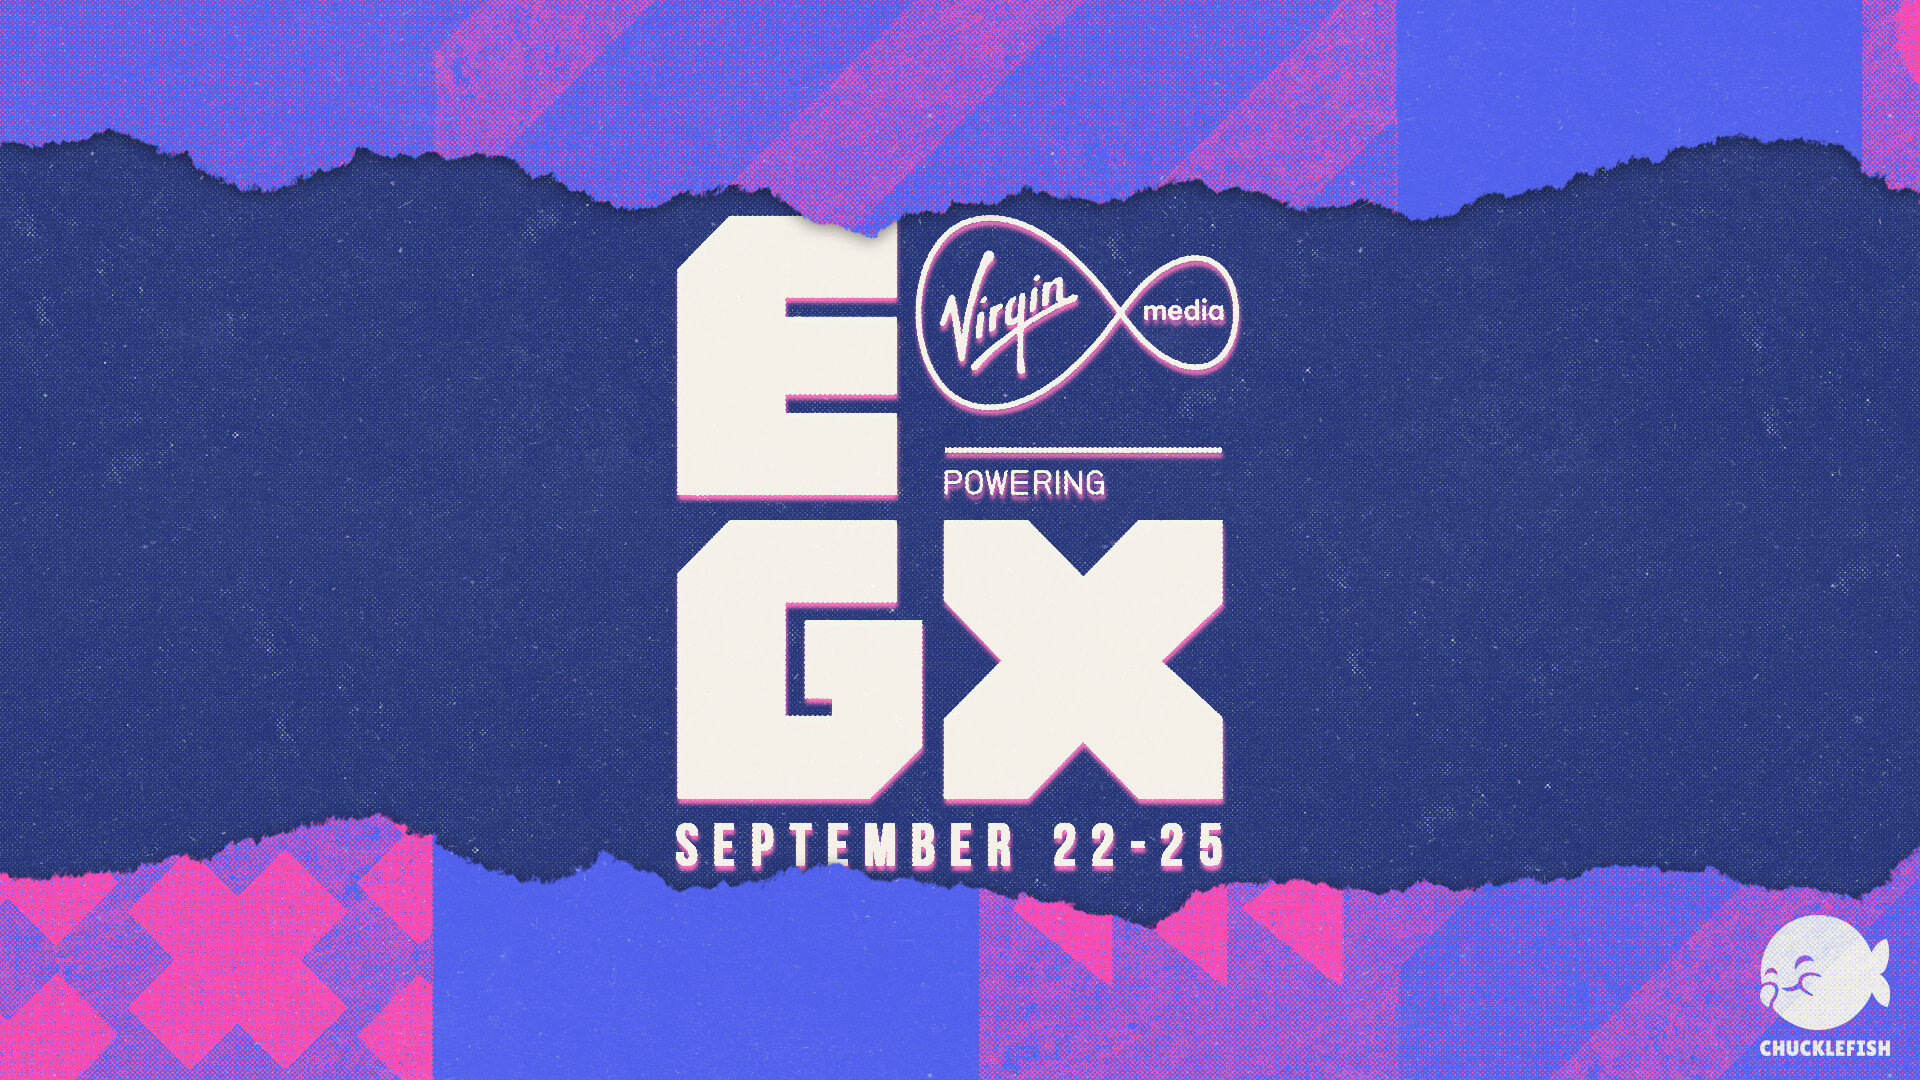 Chucklefish is going to EGX 2022!